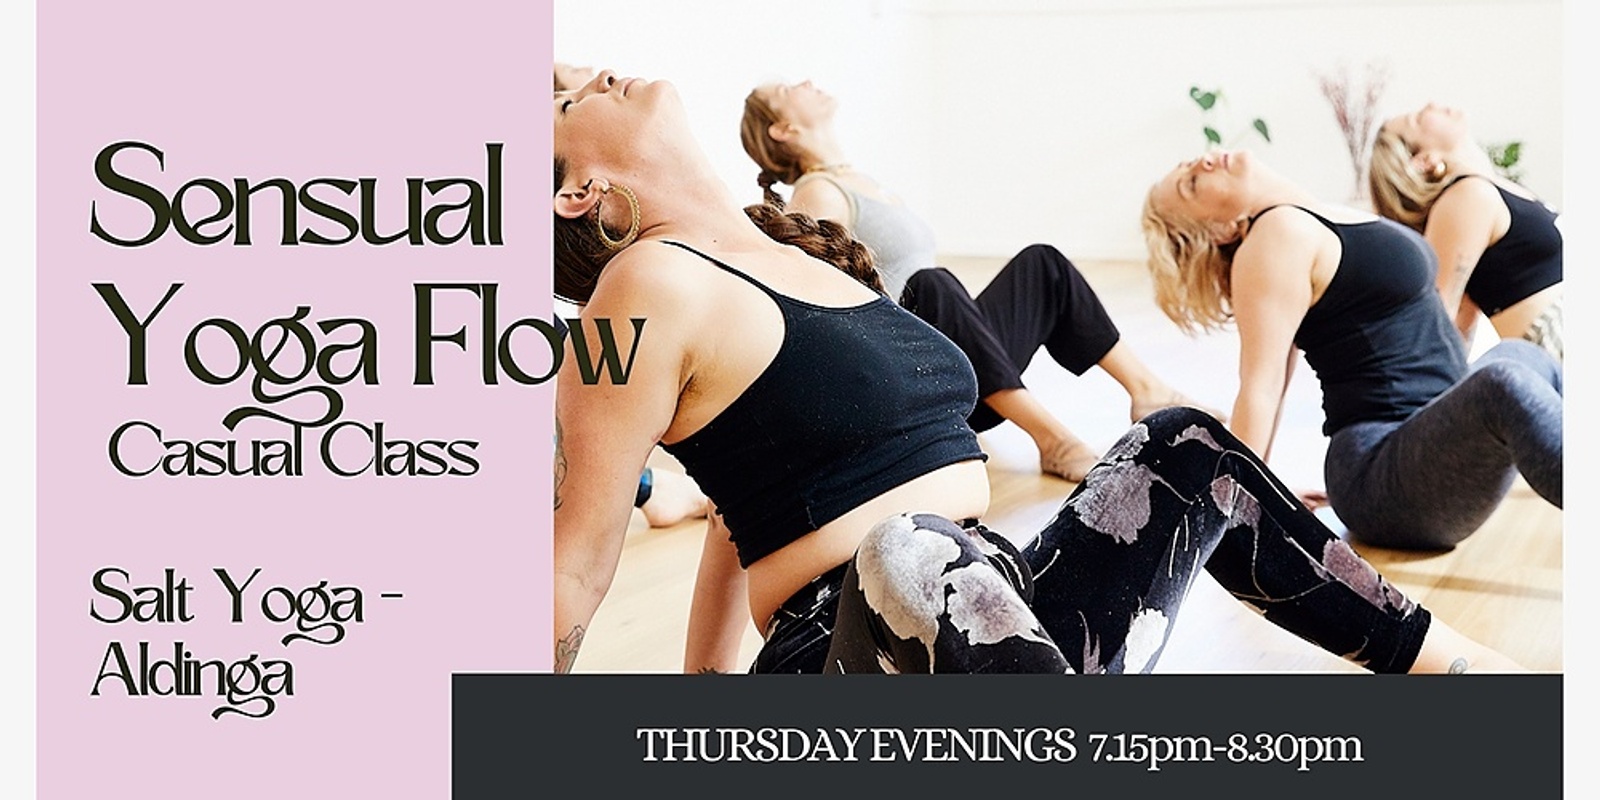 Banner image for Sensual Yoga Flow - Casual Class